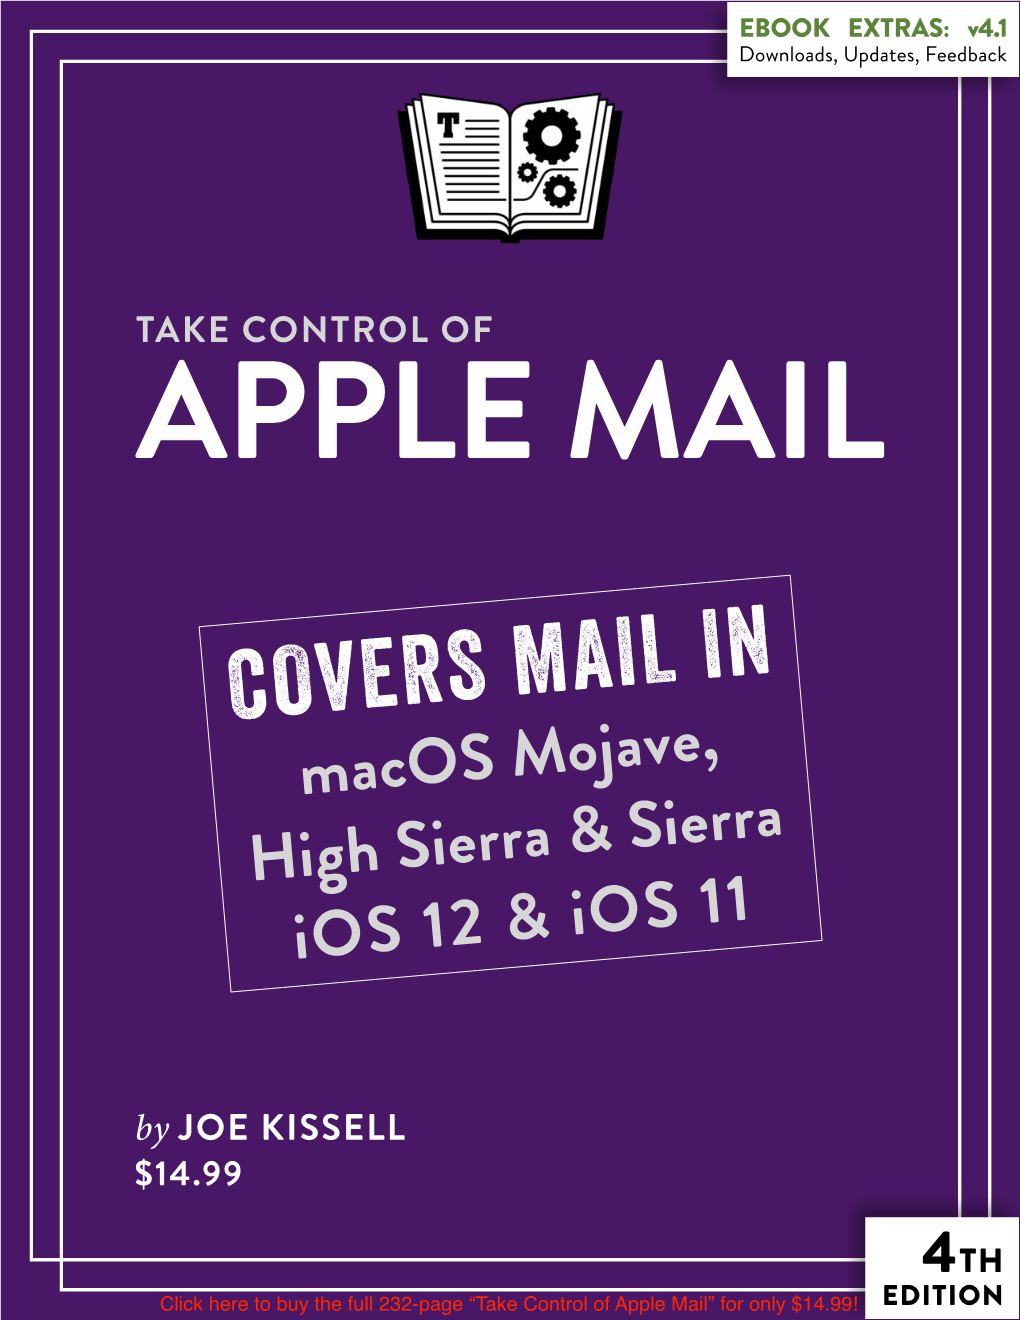 Take Control of Apple Mail (4.1) SAMPLE